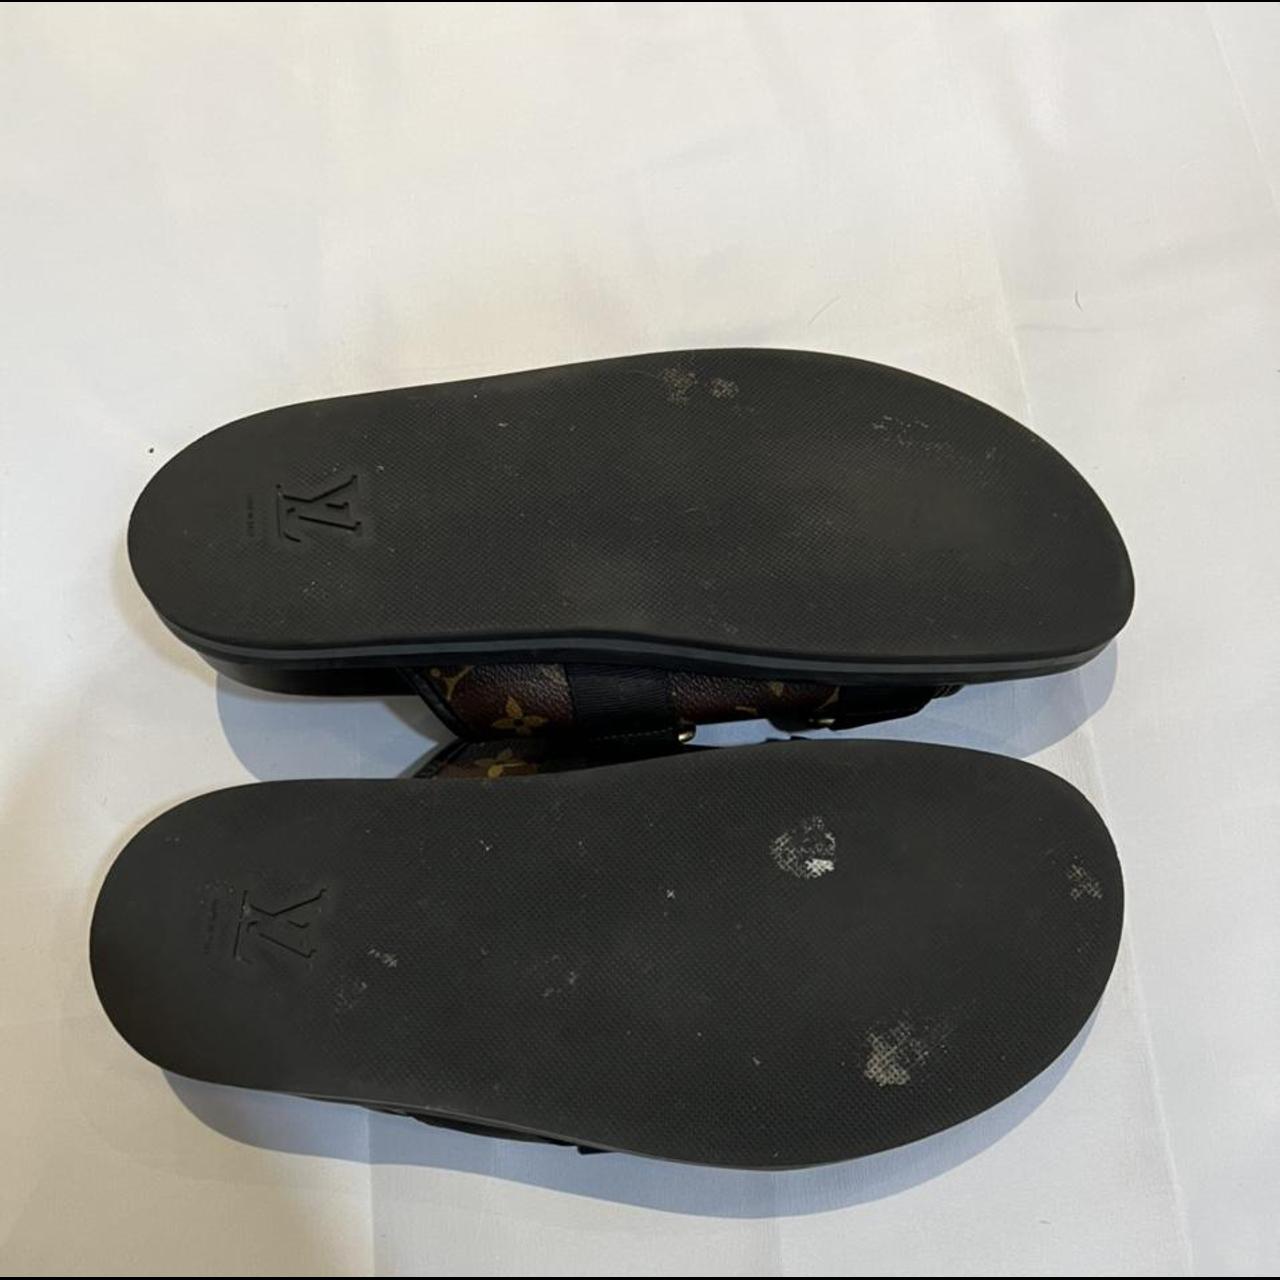 Vintage Louis Vuitton pool slides. Stepped in sticky - Depop